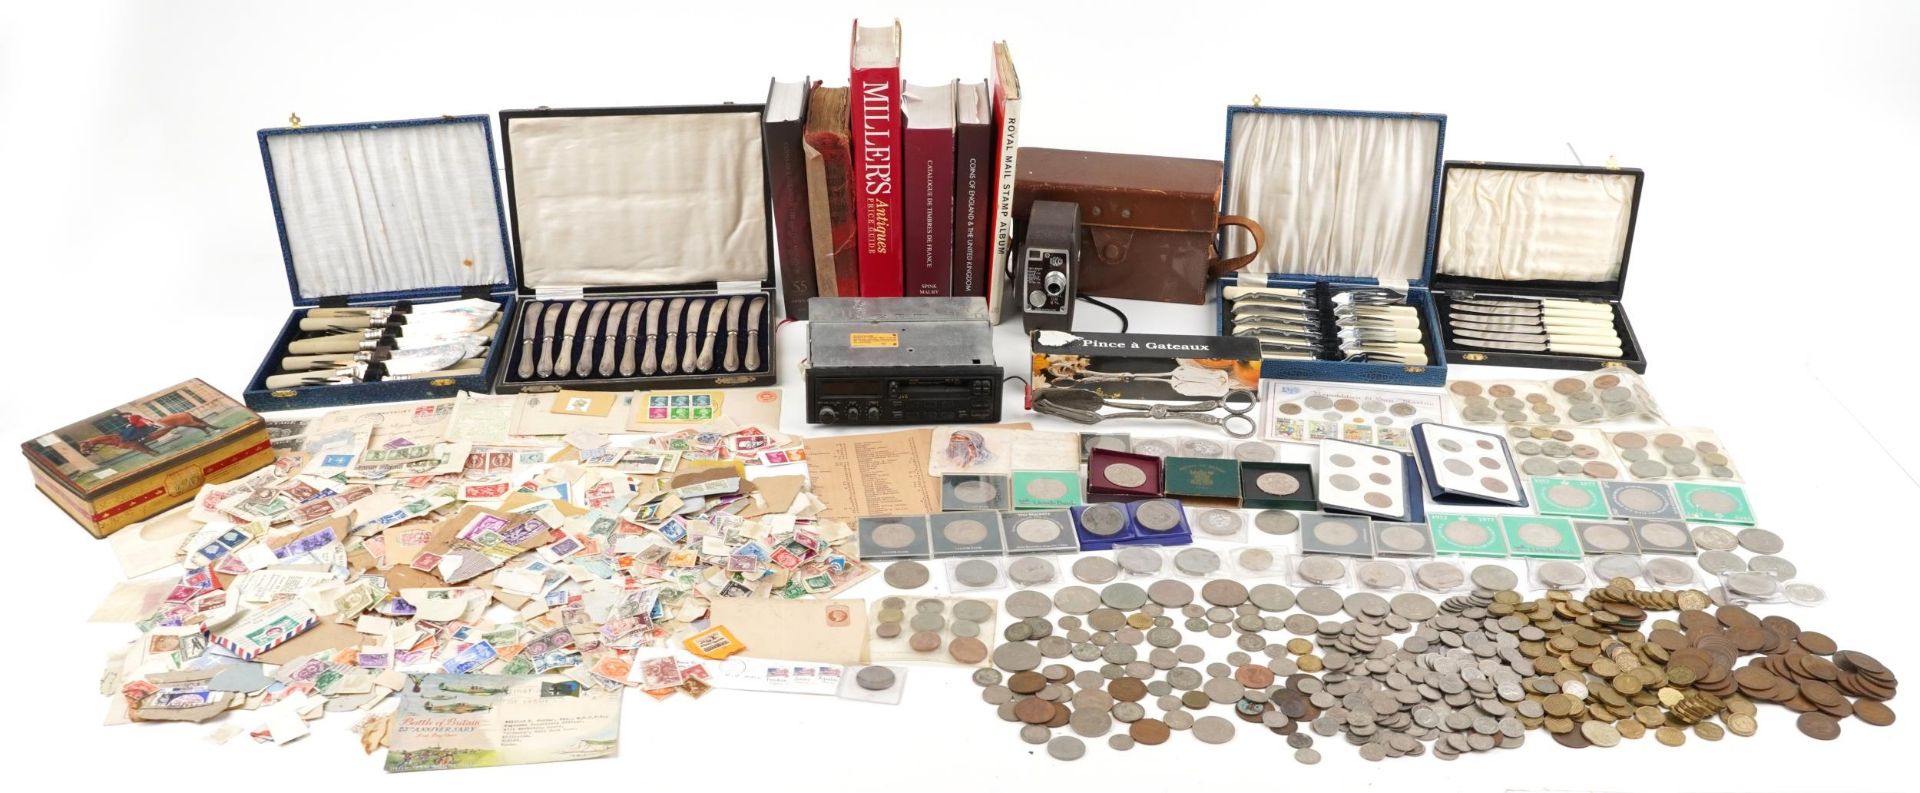 Coins, stamps and sundry items including five pound coins, Spink's coin reference books and silver